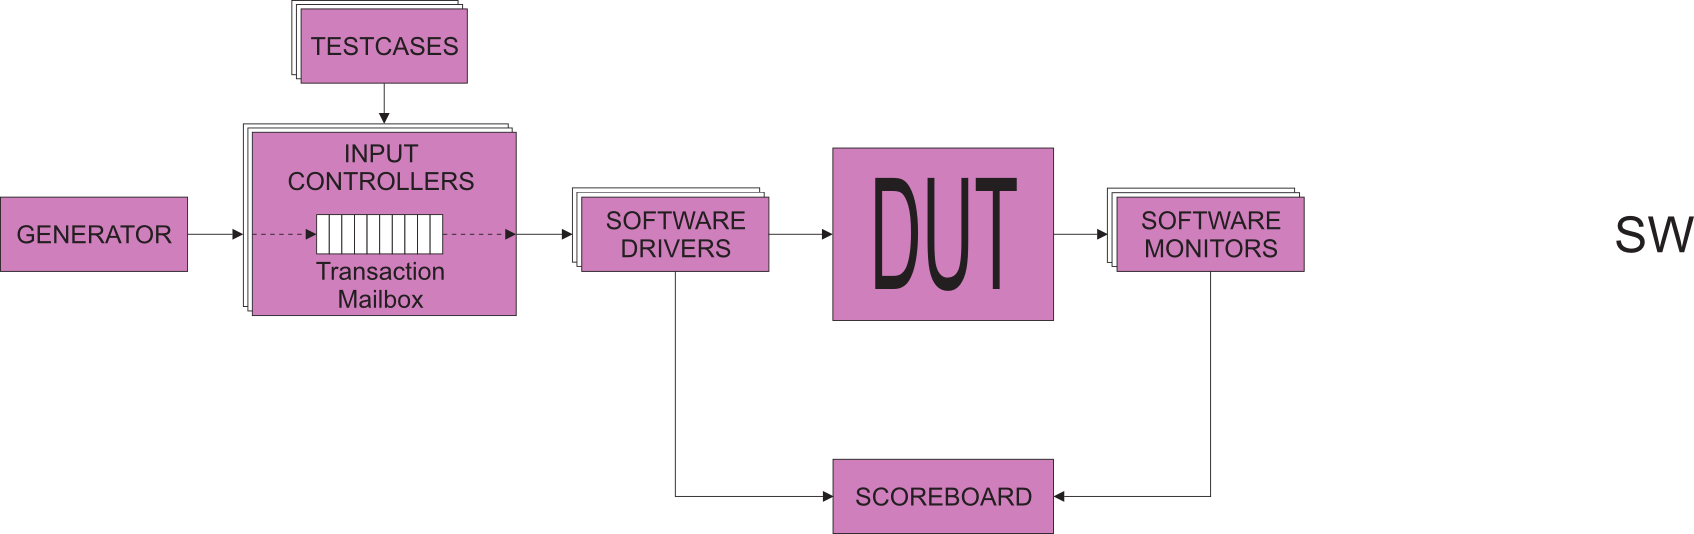 Architecture of software framework